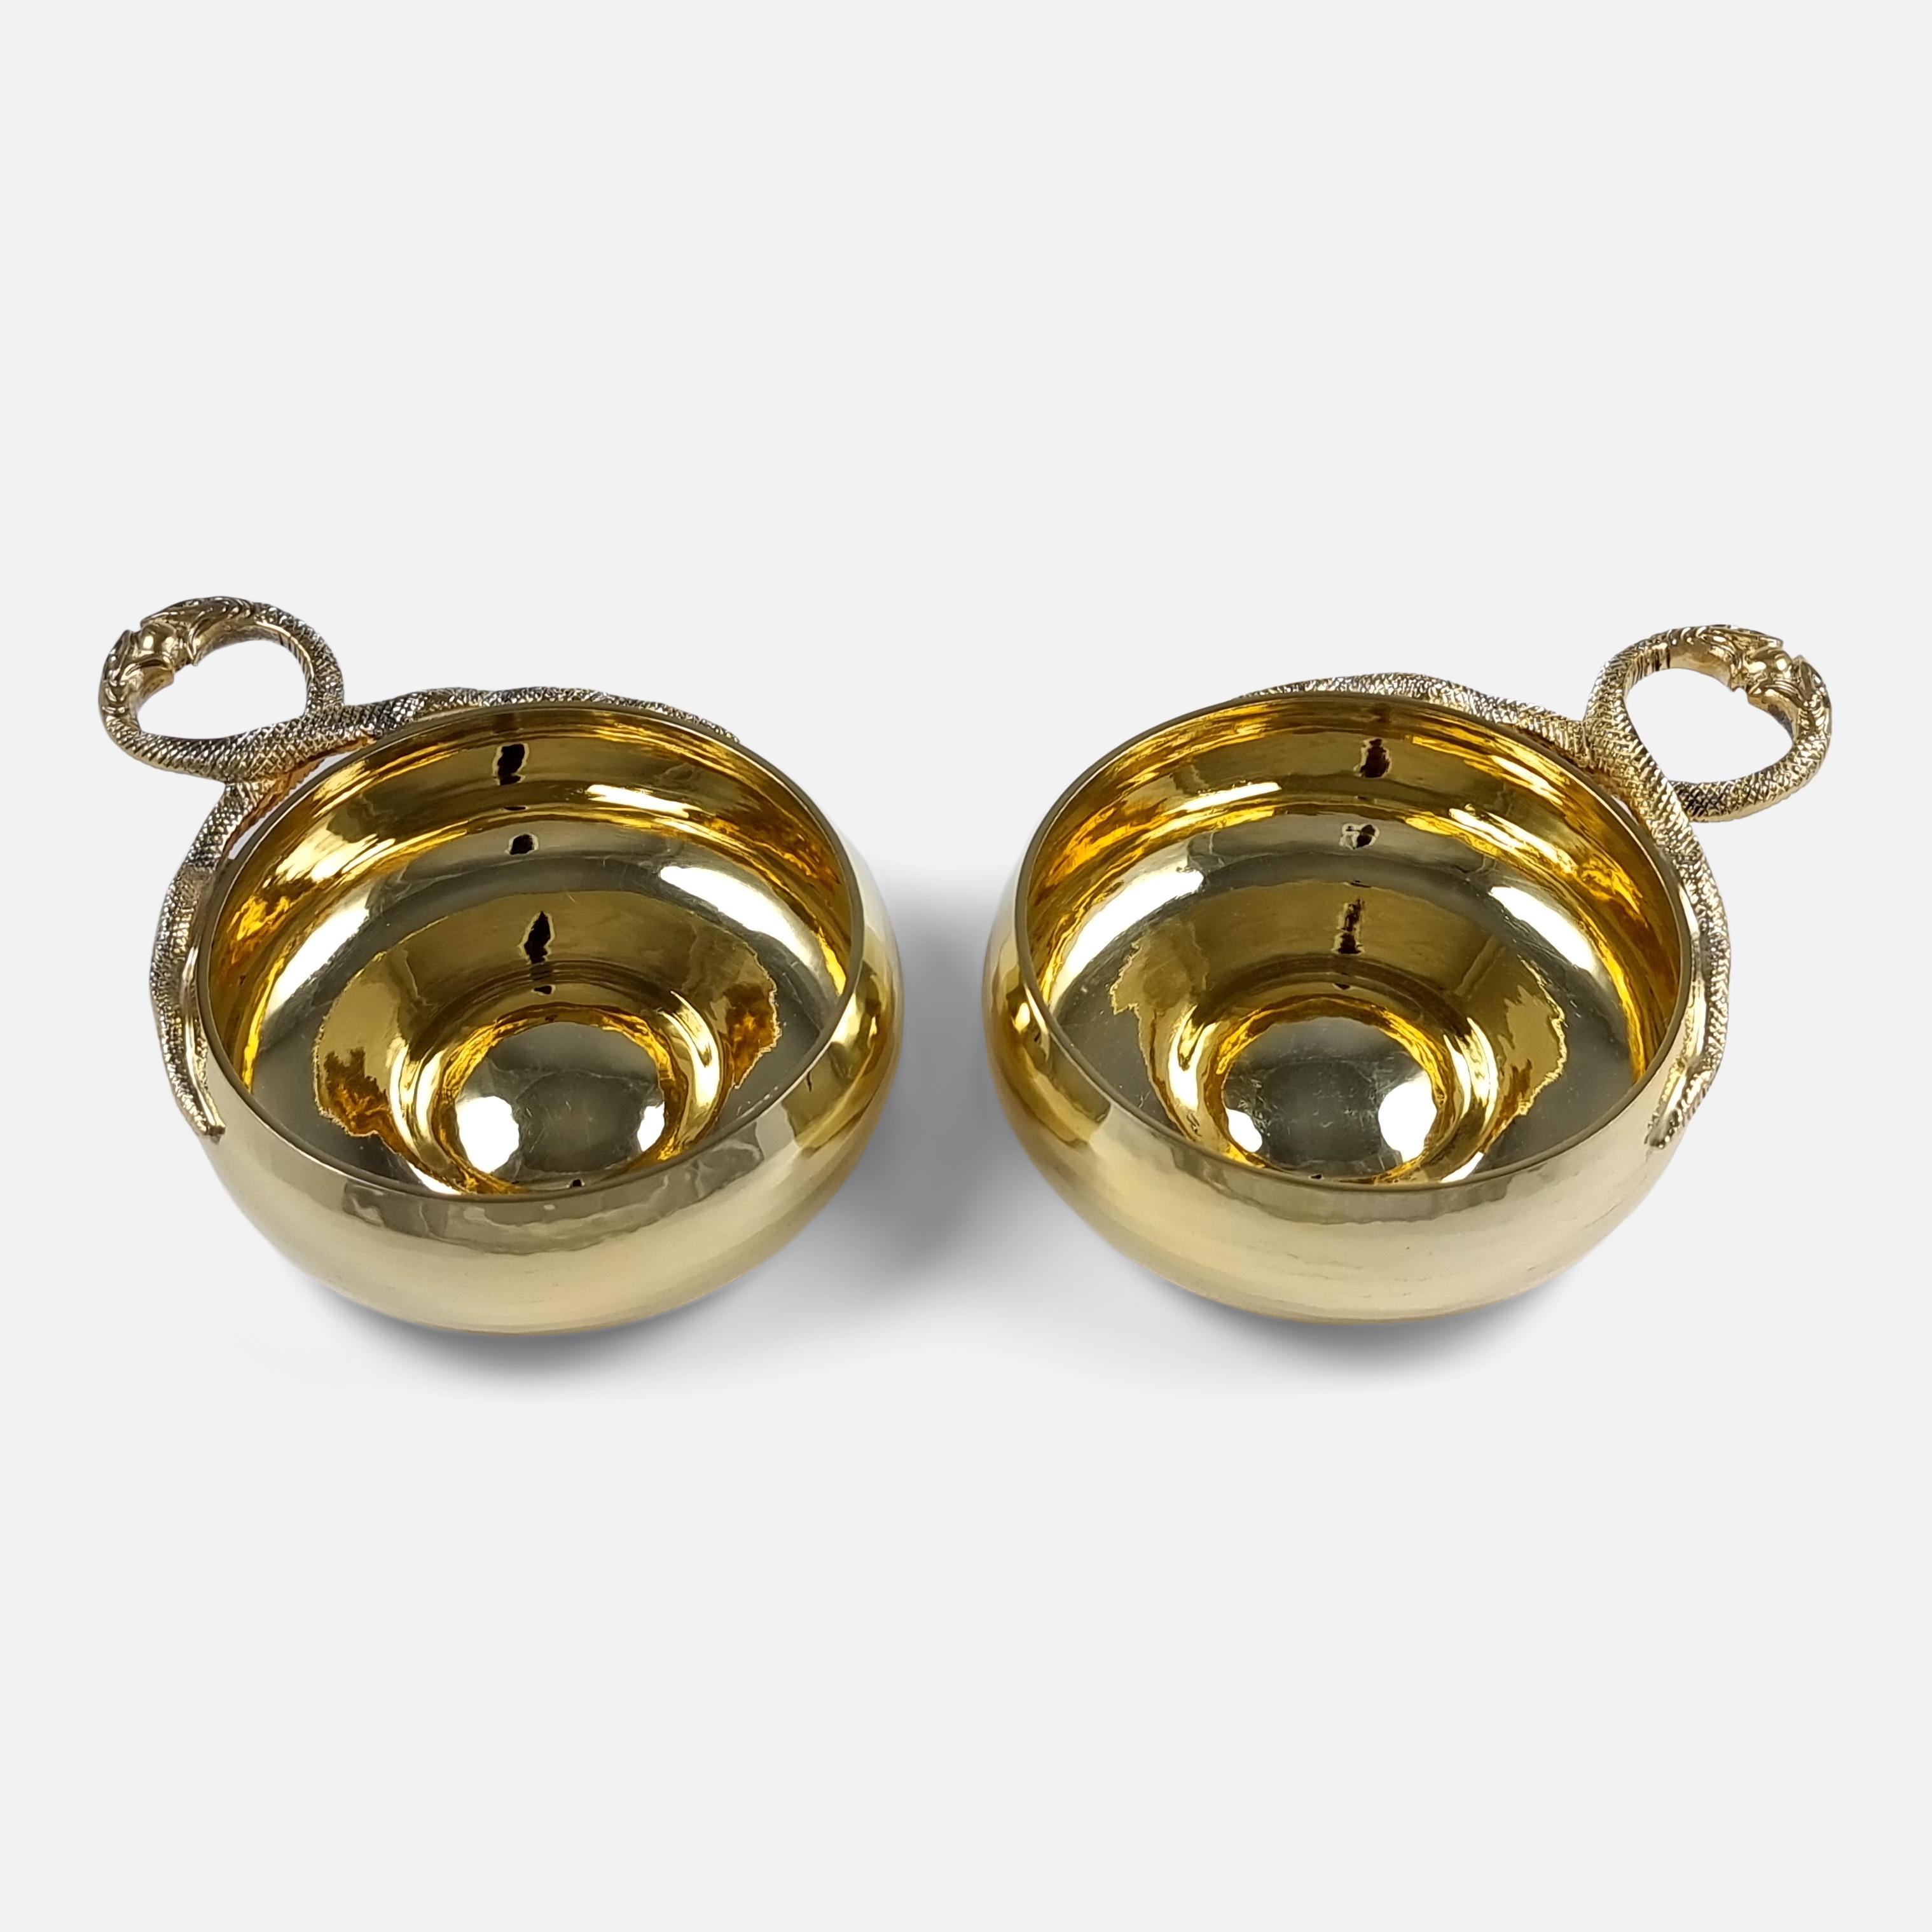 British Cased Pair of Sterling Silver-Gilt Wine Tasters, 1934